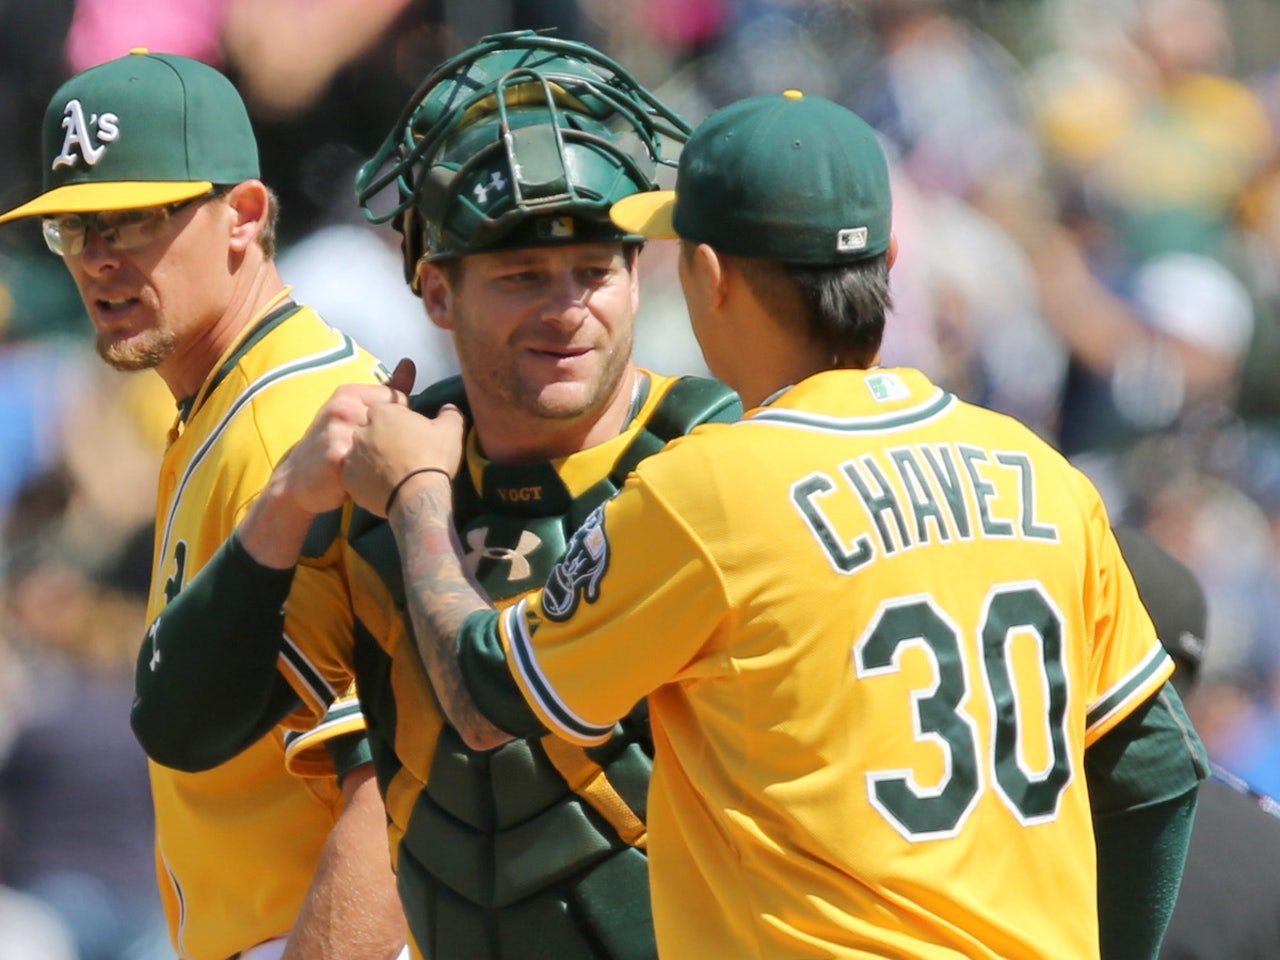 A's were happy to reward dominant Chavez with runs, victory